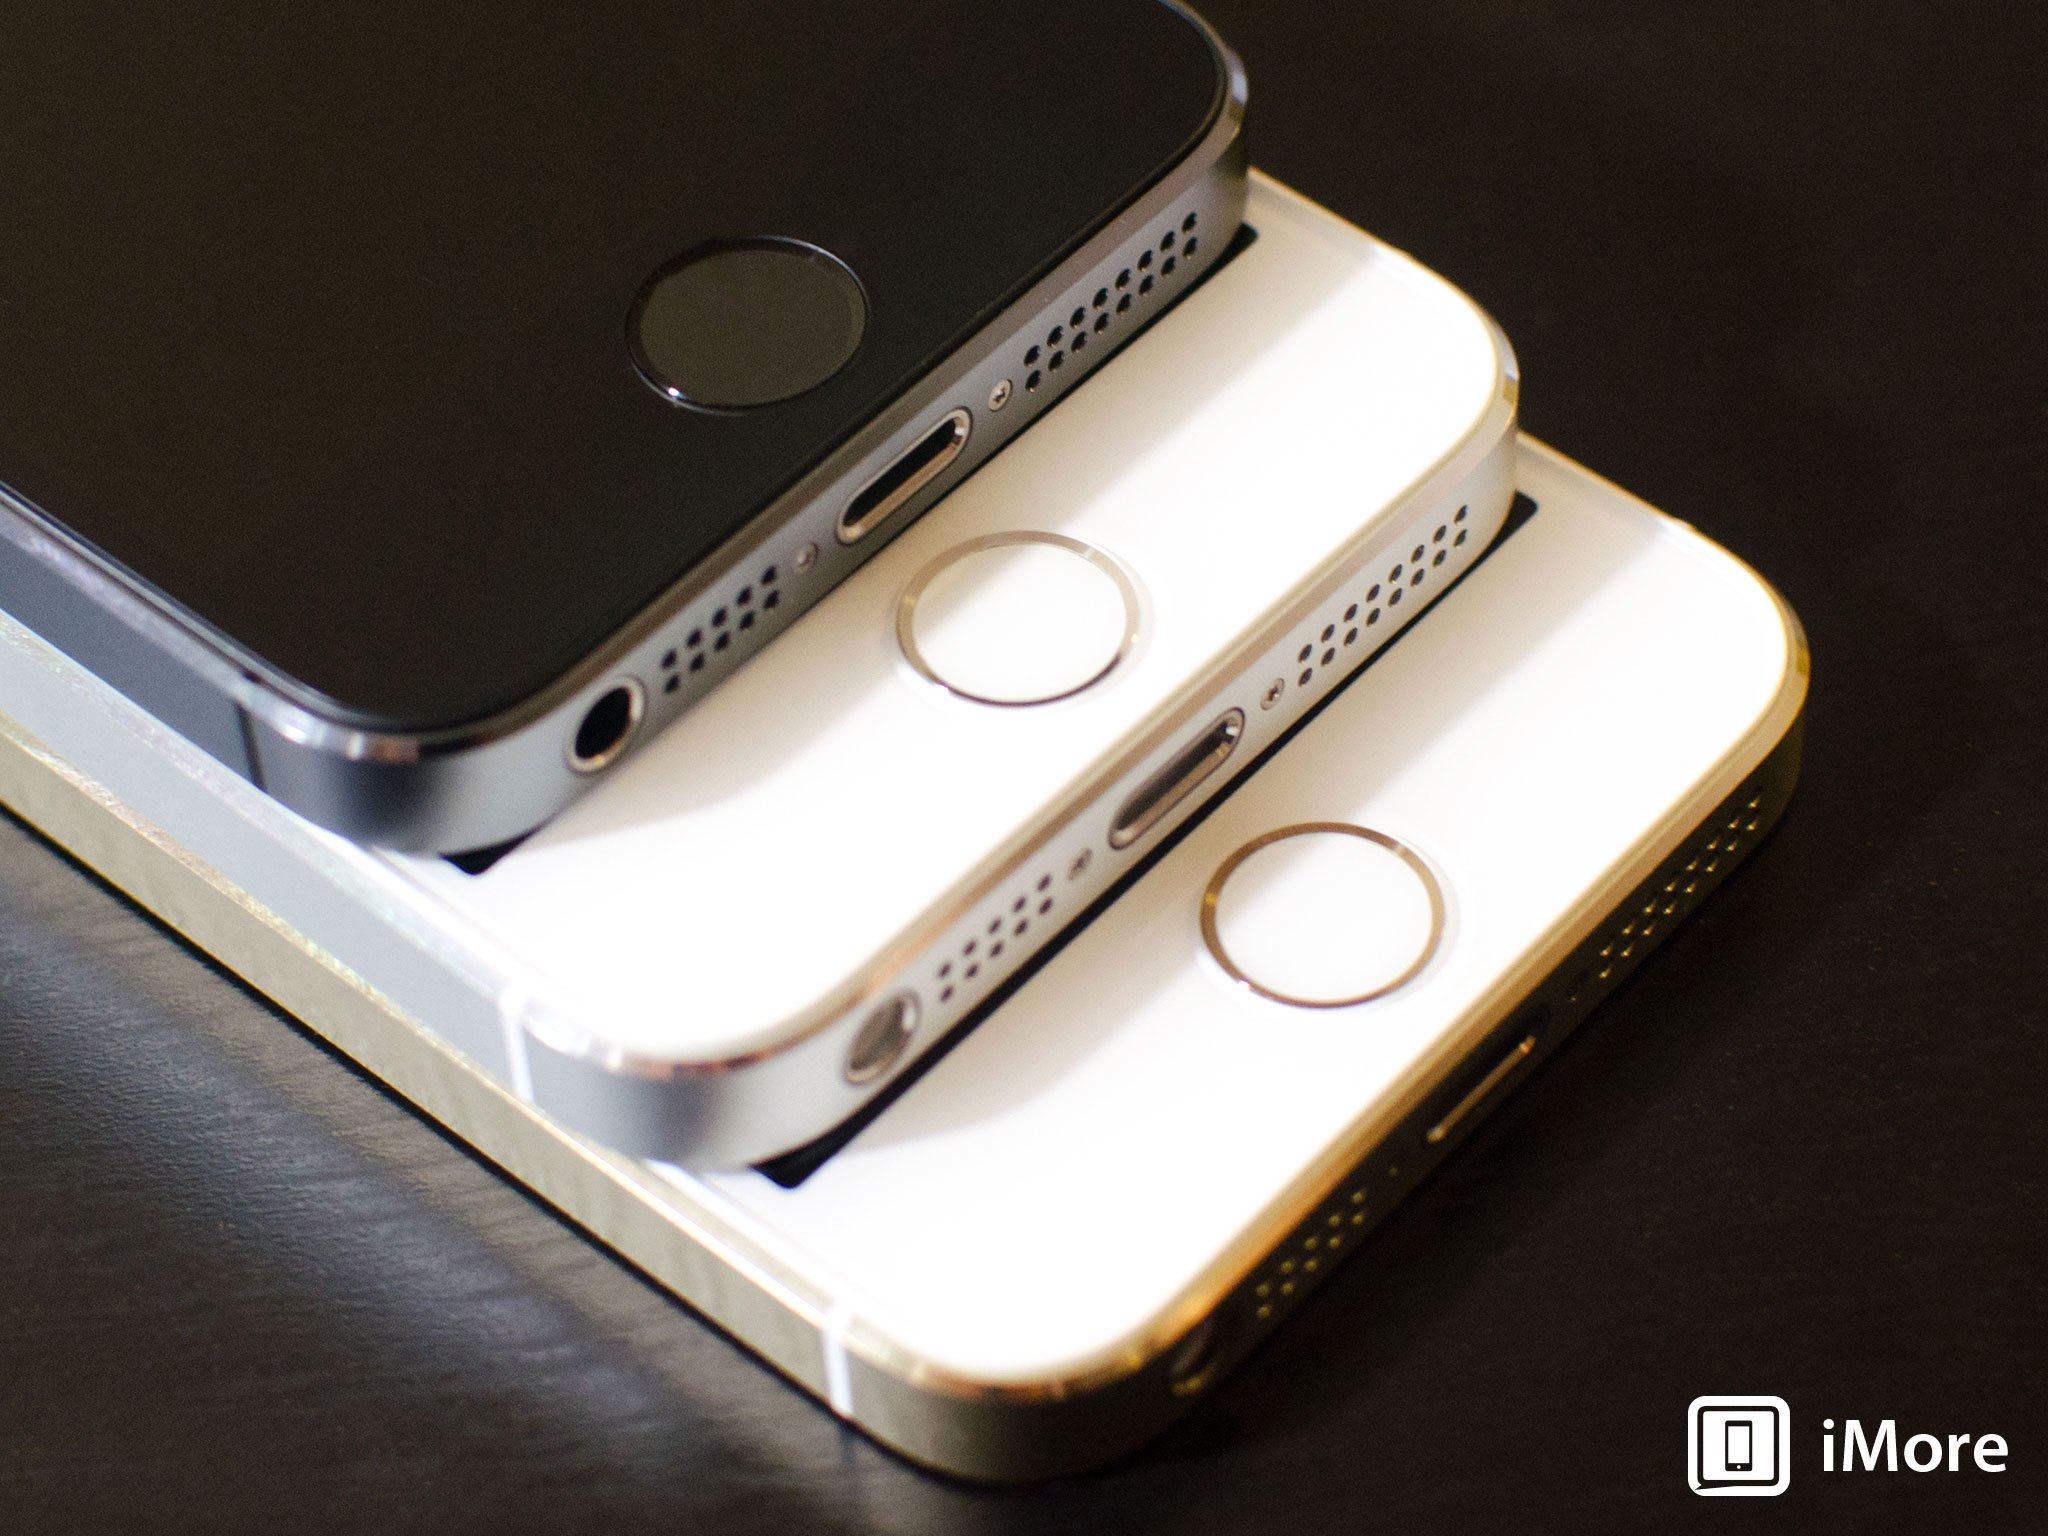 iphone_5s_gold_silver_gray_touch_id_hero.jpg